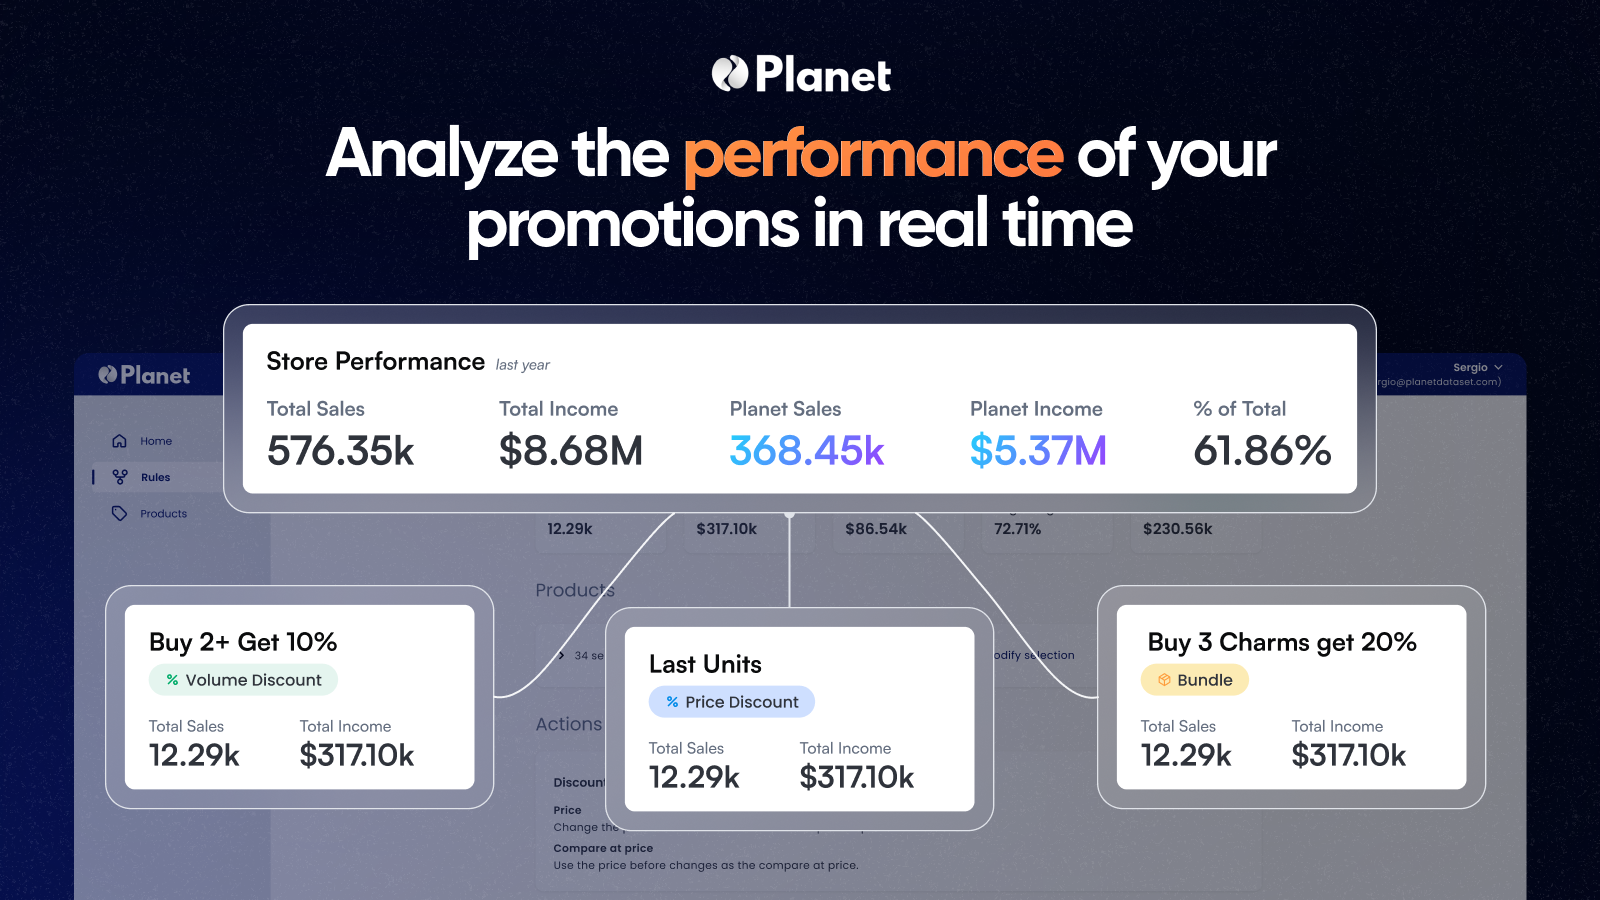 Analyze the performance or your promotions in real time